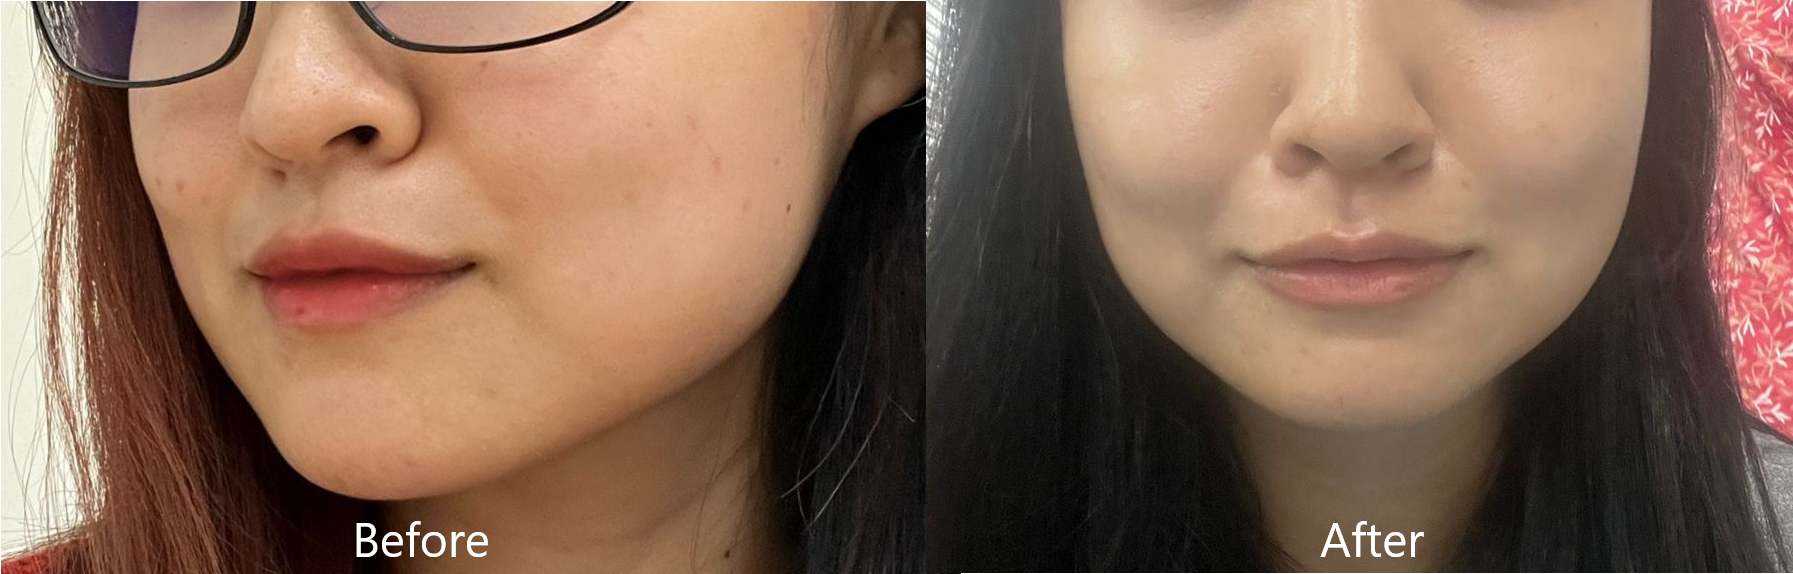 "I could see a huge improvement in my skin condition since using Putryana. Some of my favourite products include its Vitamin C Serum -  Cnoline, which helped reduce the appearance of my acne scars along my chin while keeping the texture smooth and radiant."